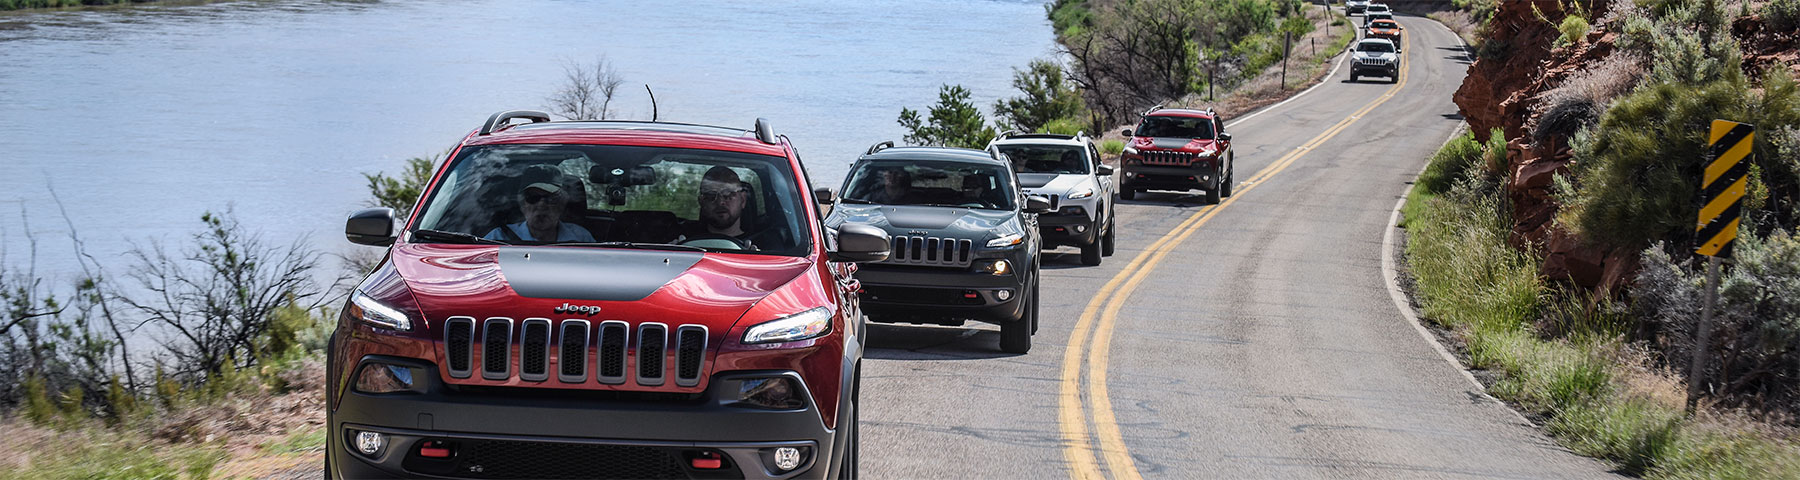 row of jeeps on the road